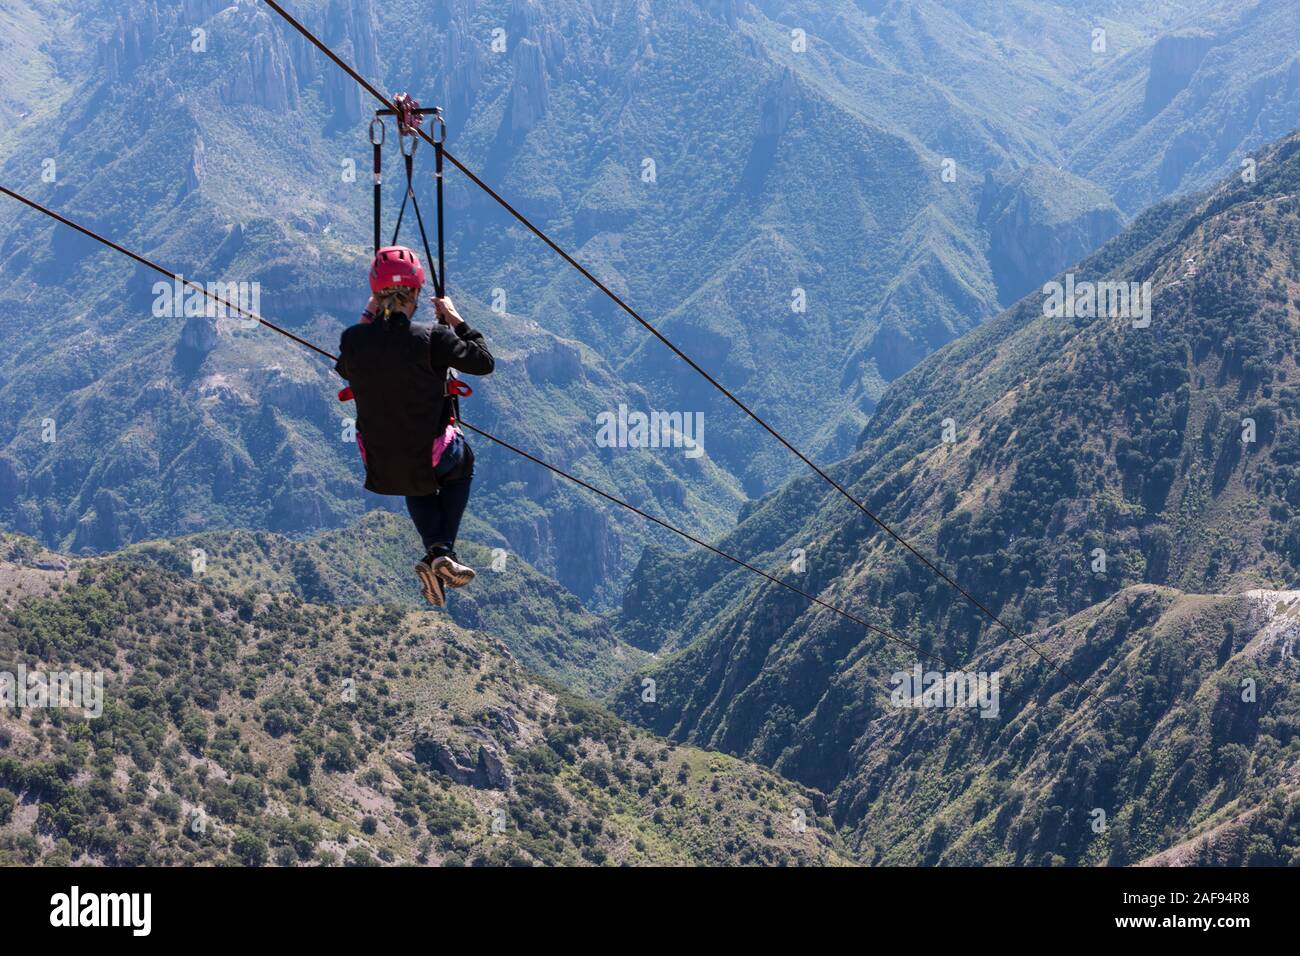 Ziplining at Divisadero, Copper Canyon, Chihuahua, Mexico.  8350 feet long, longest zip line in the world.  Speed may reach 70 mph on the descent. Stock Photo